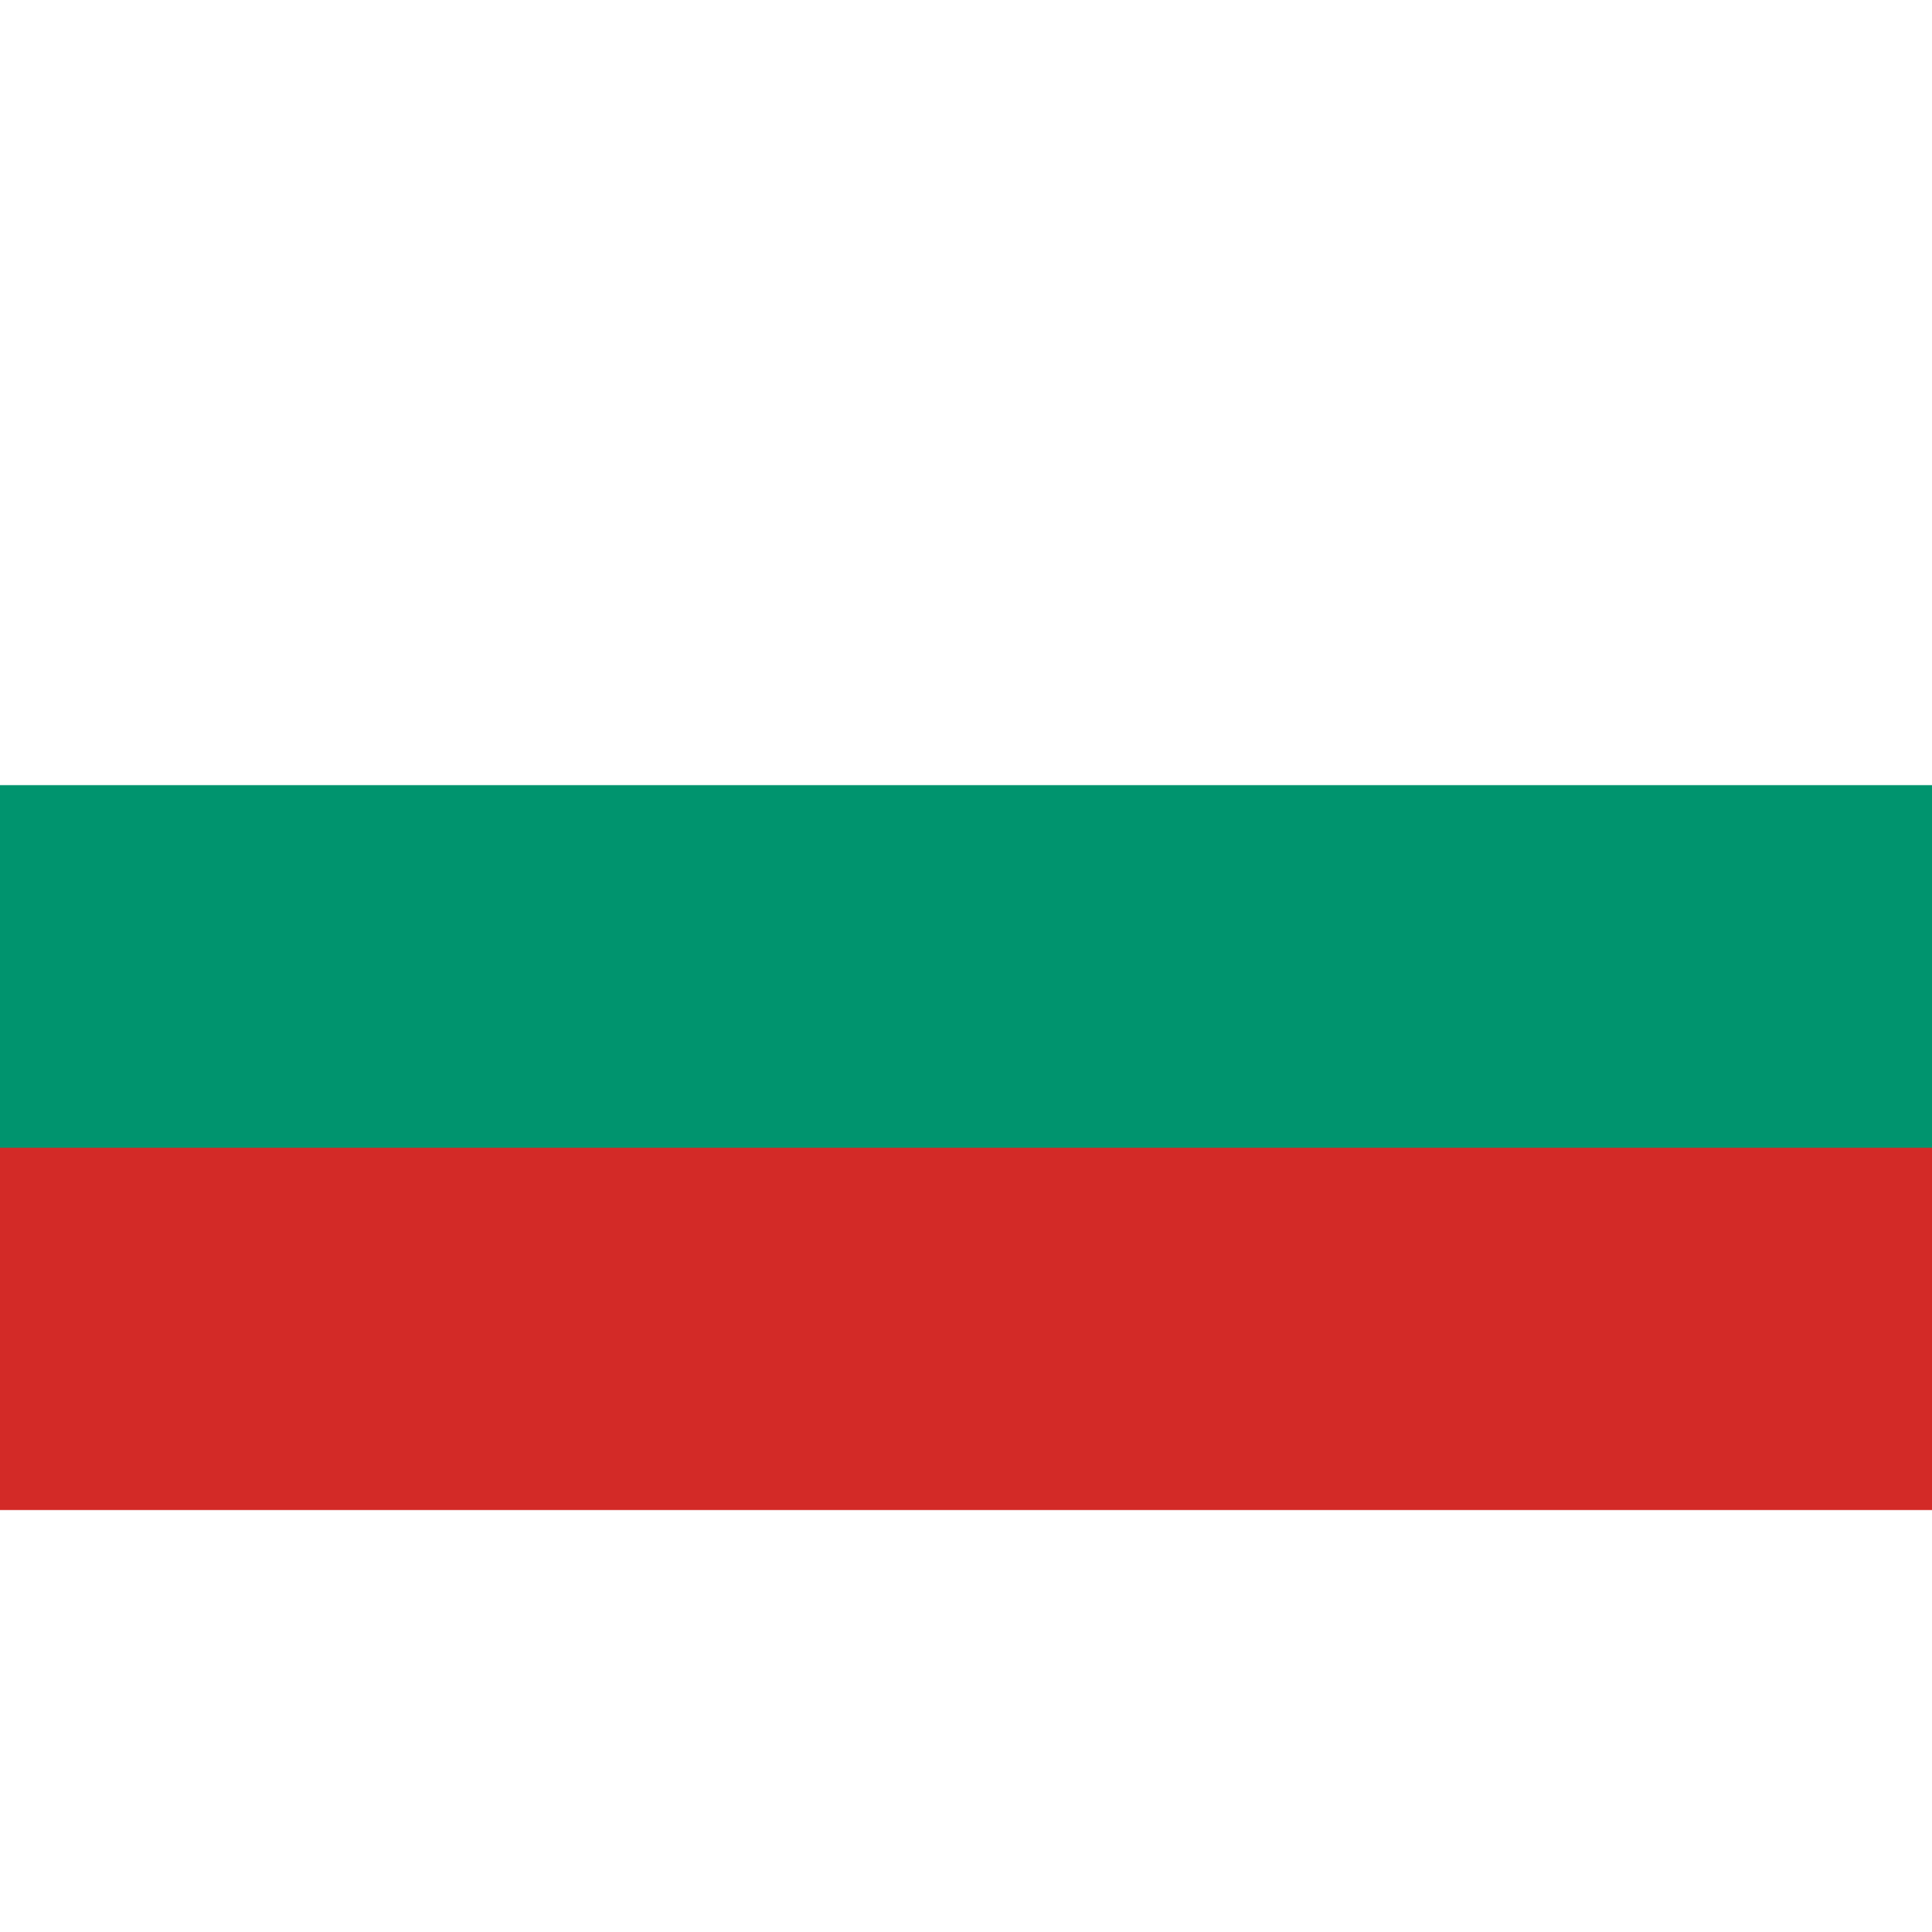 The Bulgarian flag consists of 3 equal-sized horizontal stripes in white, green, and red. 